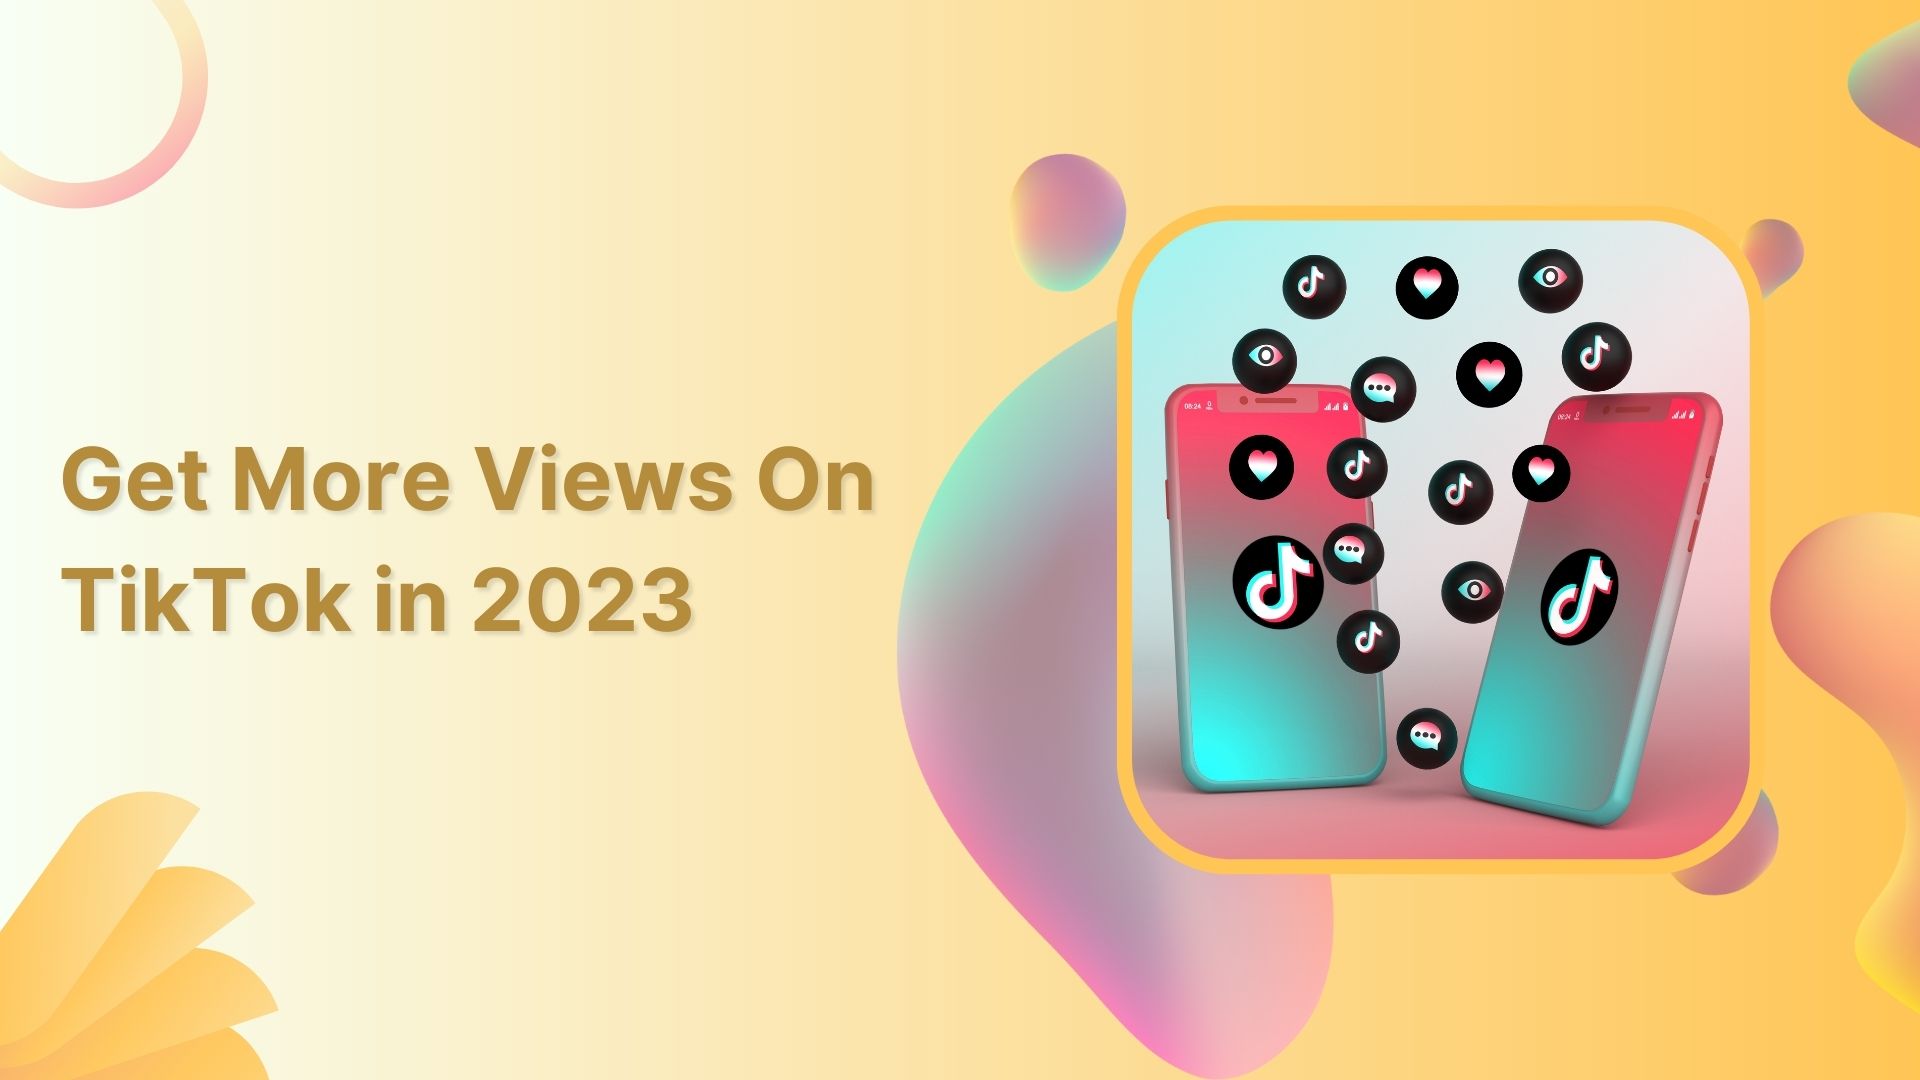 how to get more views on tiktok in 2023